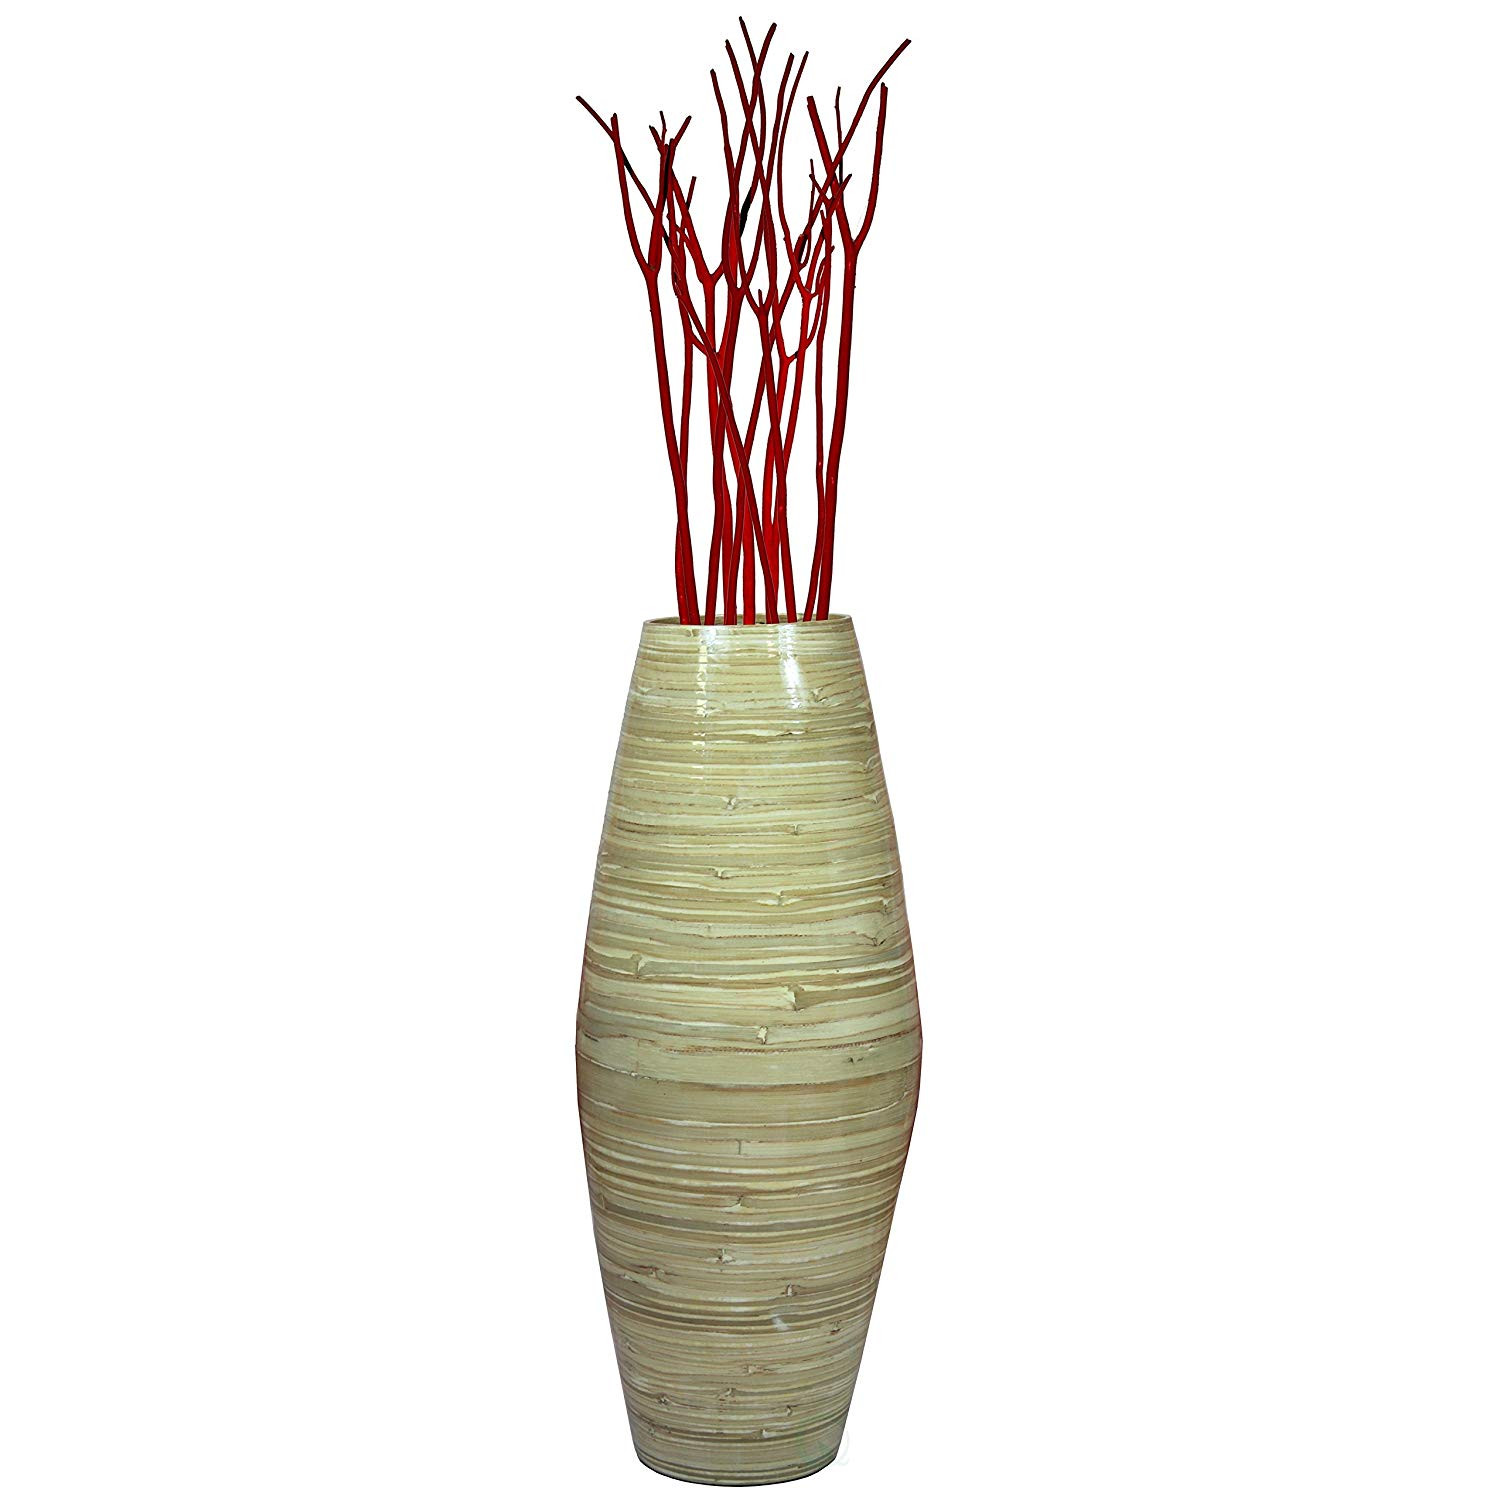 11 Famous Large Bamboo Floor Vases 2024 free download large bamboo floor vases of amazon com uniquewise 27 5 tall bamboo floor vase red home intended for amazon com uniquewise 27 5 tall bamboo floor vase red home kitchen